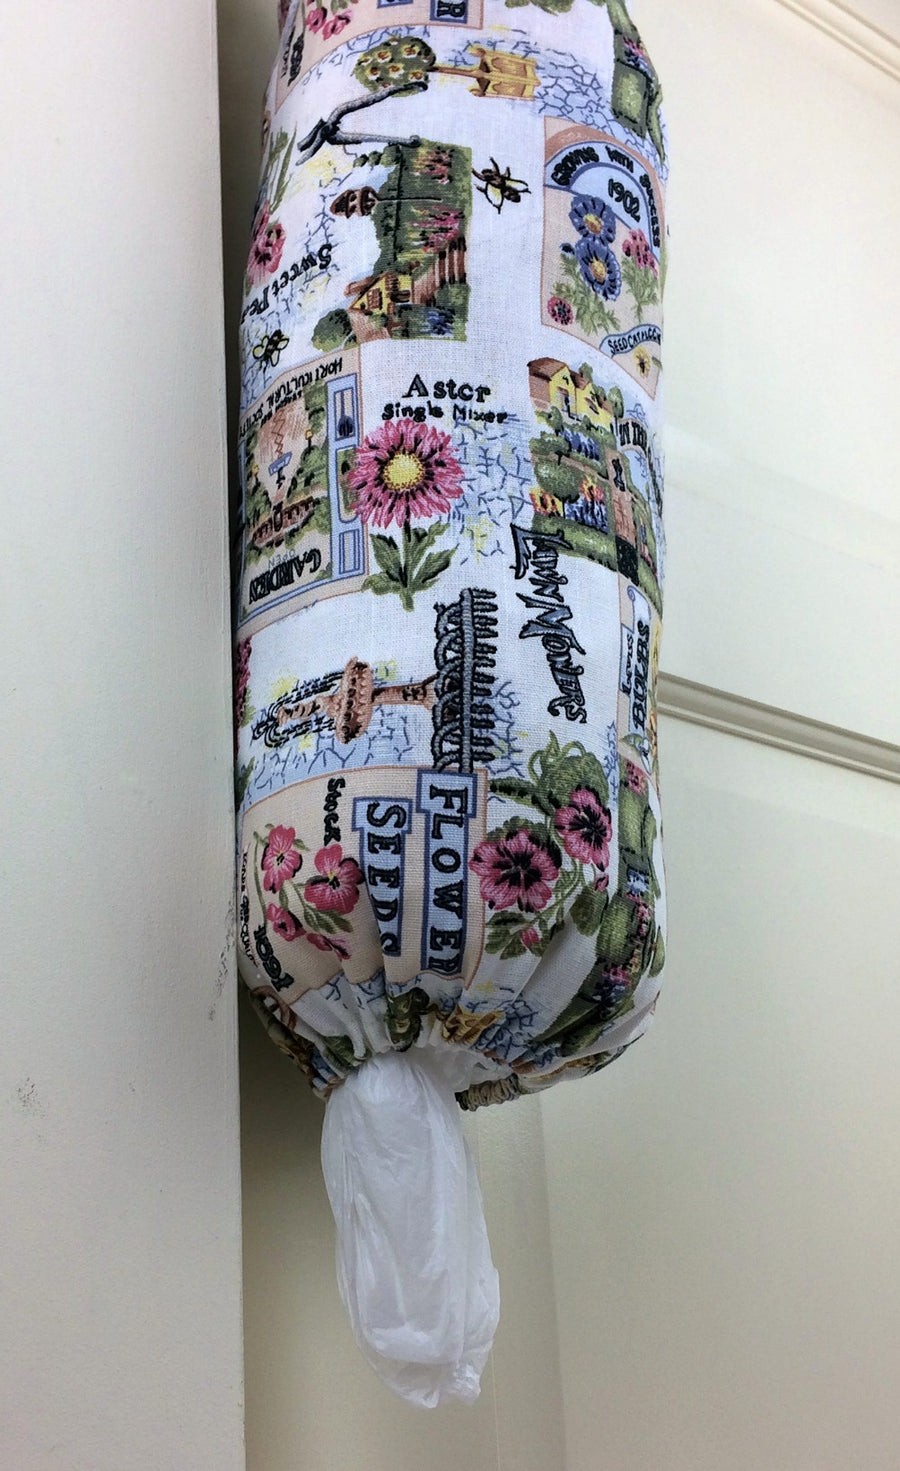 plastic bag dispenser and holder for those pesky bags for life that take over this one is green gardening theme